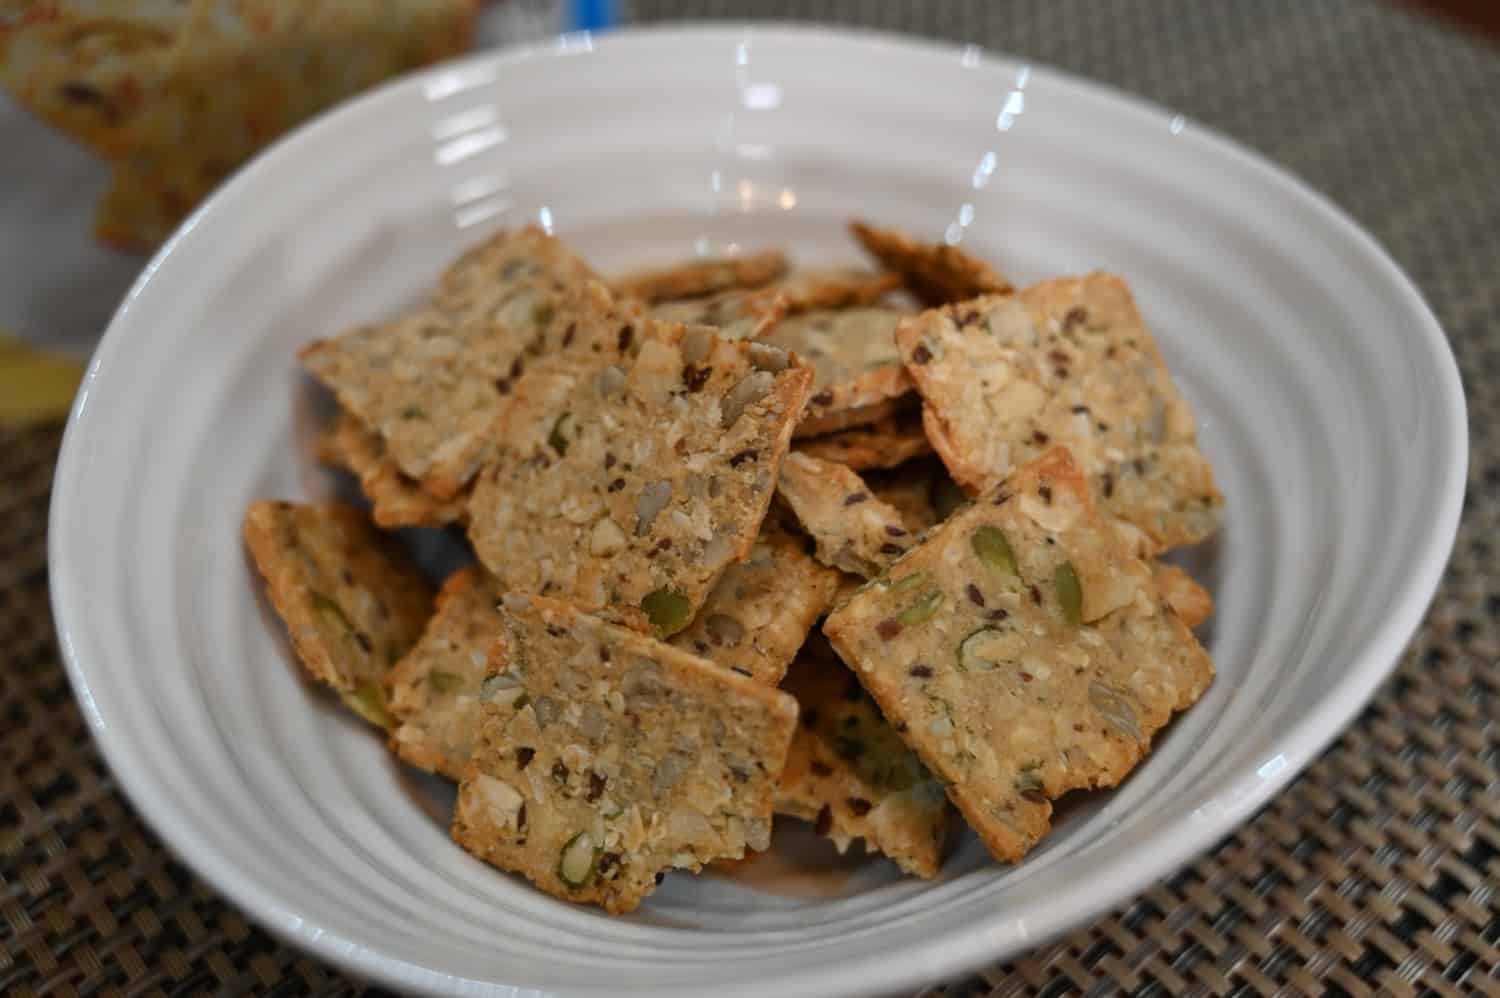 A close-up of a bowl of the keto crackers.